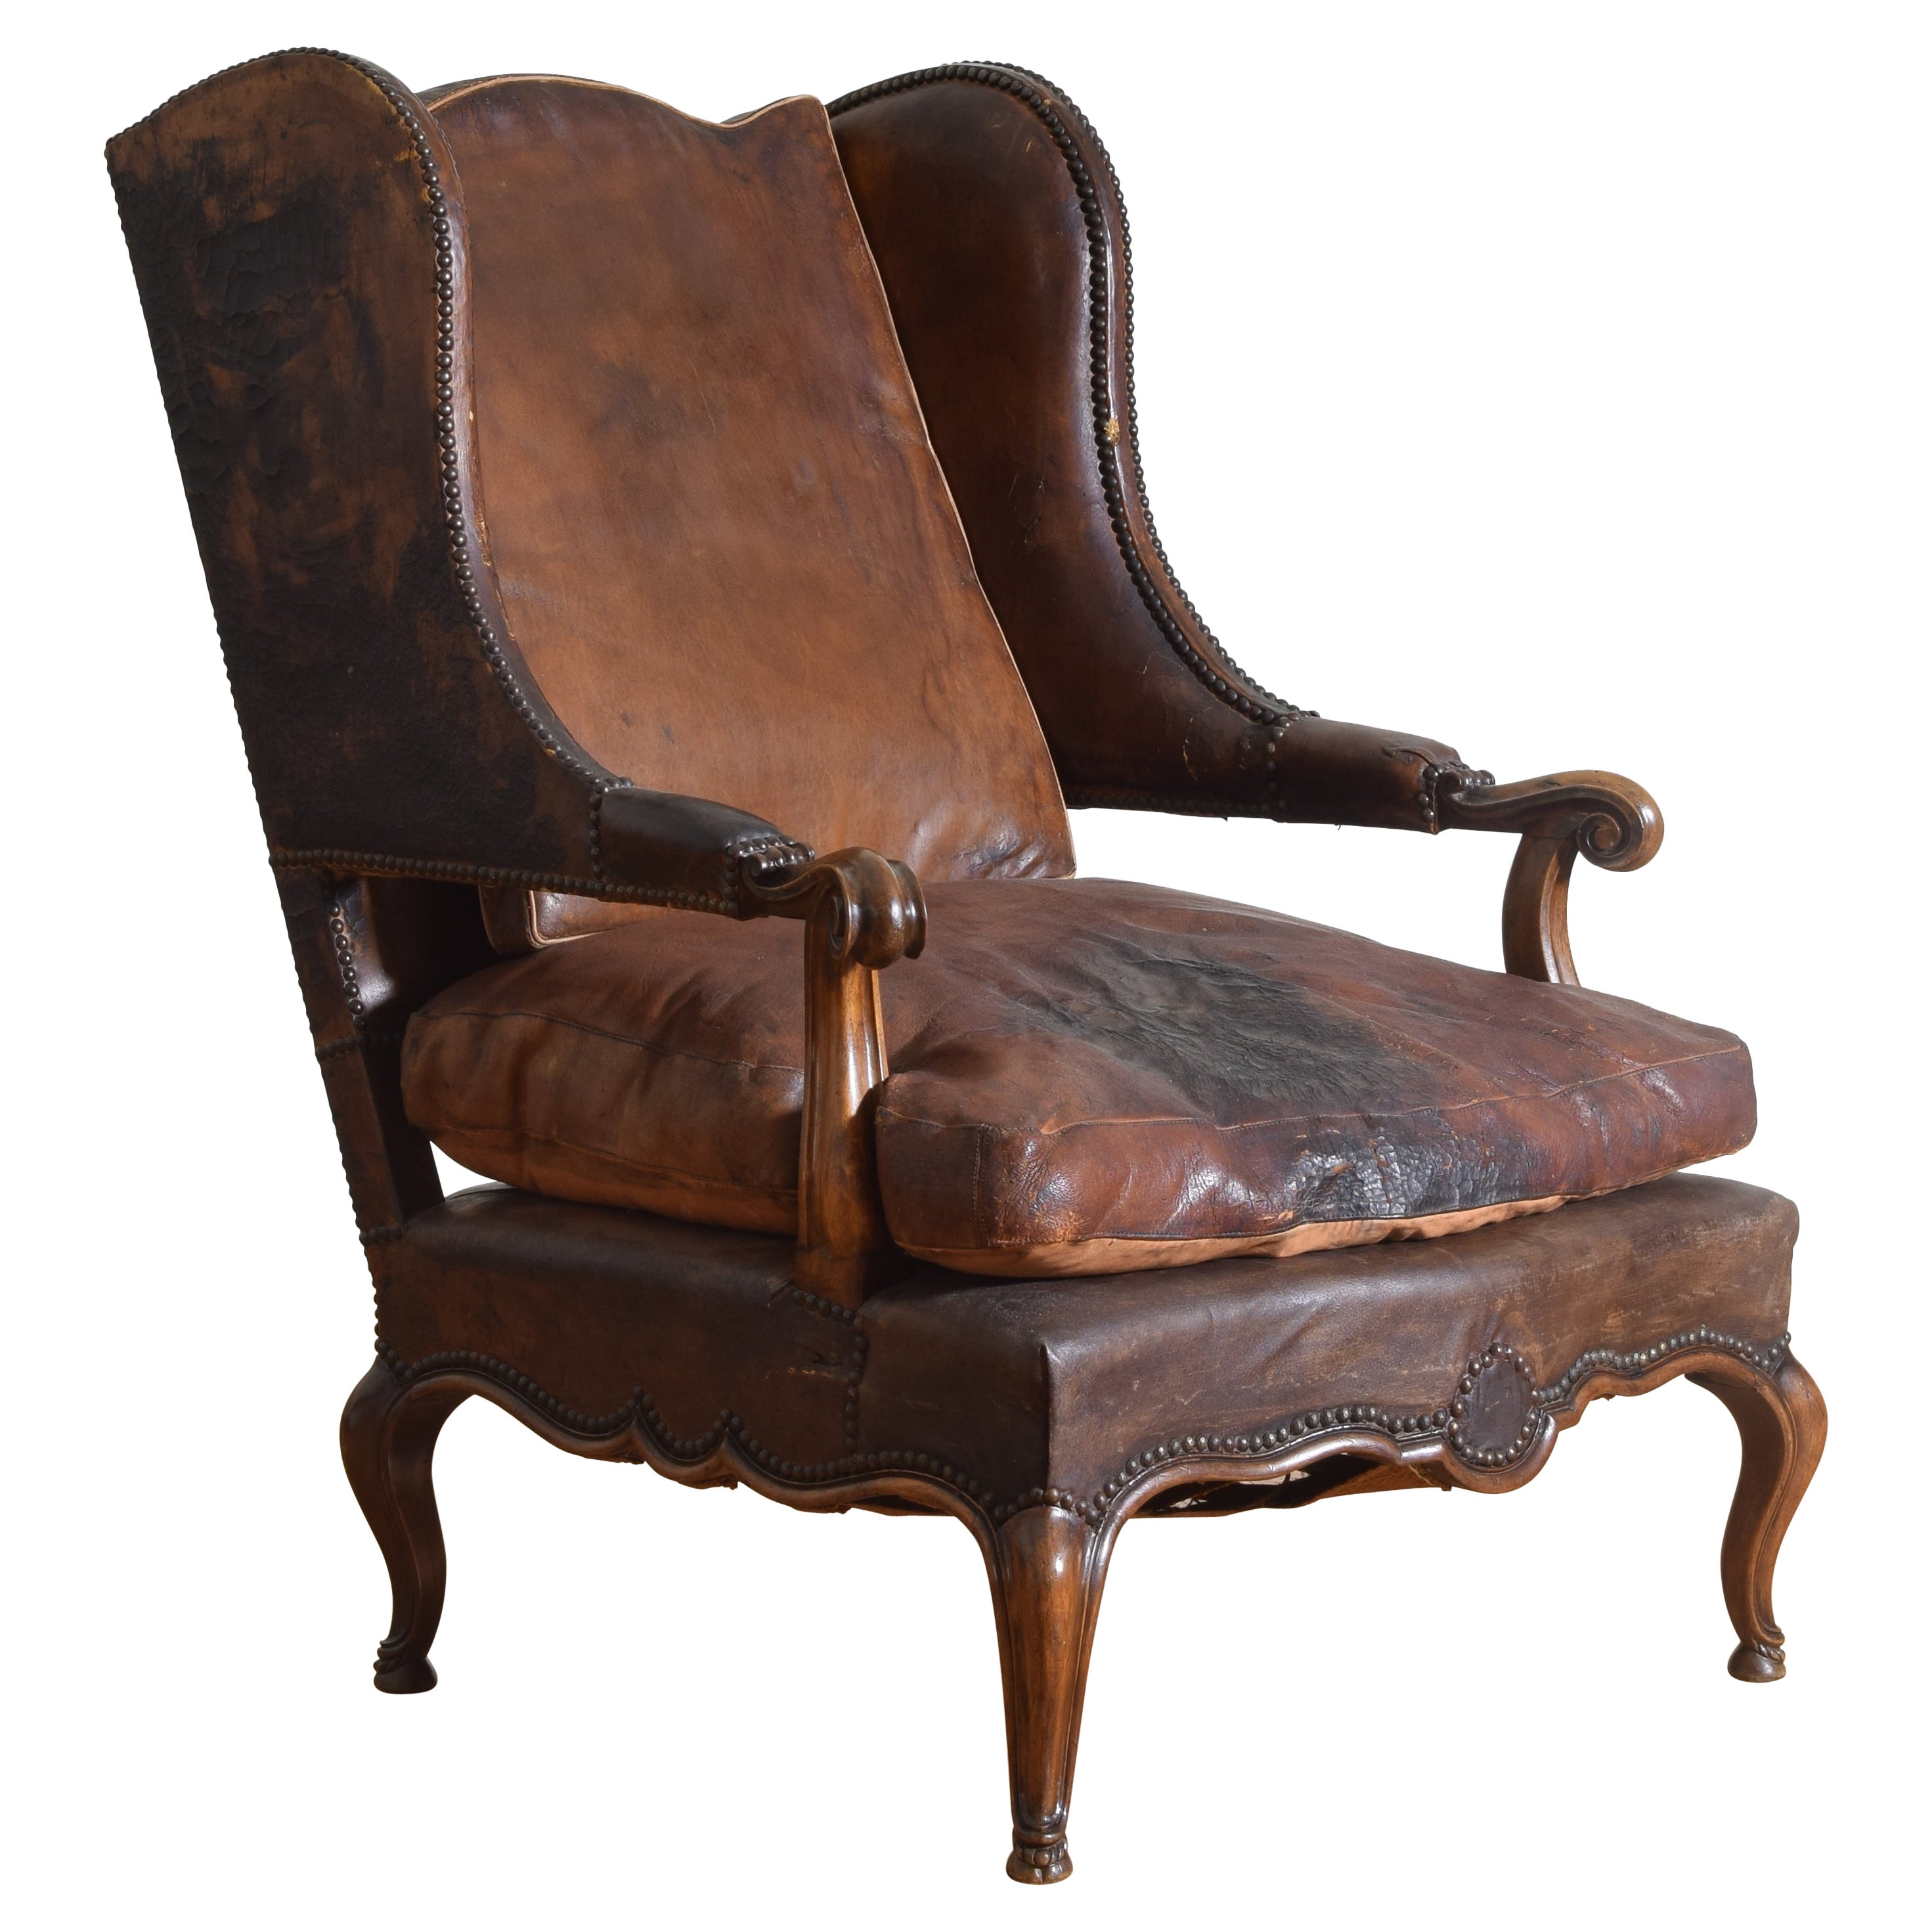 Italian, Savoy, Carved Walnut & Leather Upholstered Bergere, 18th century For Sale